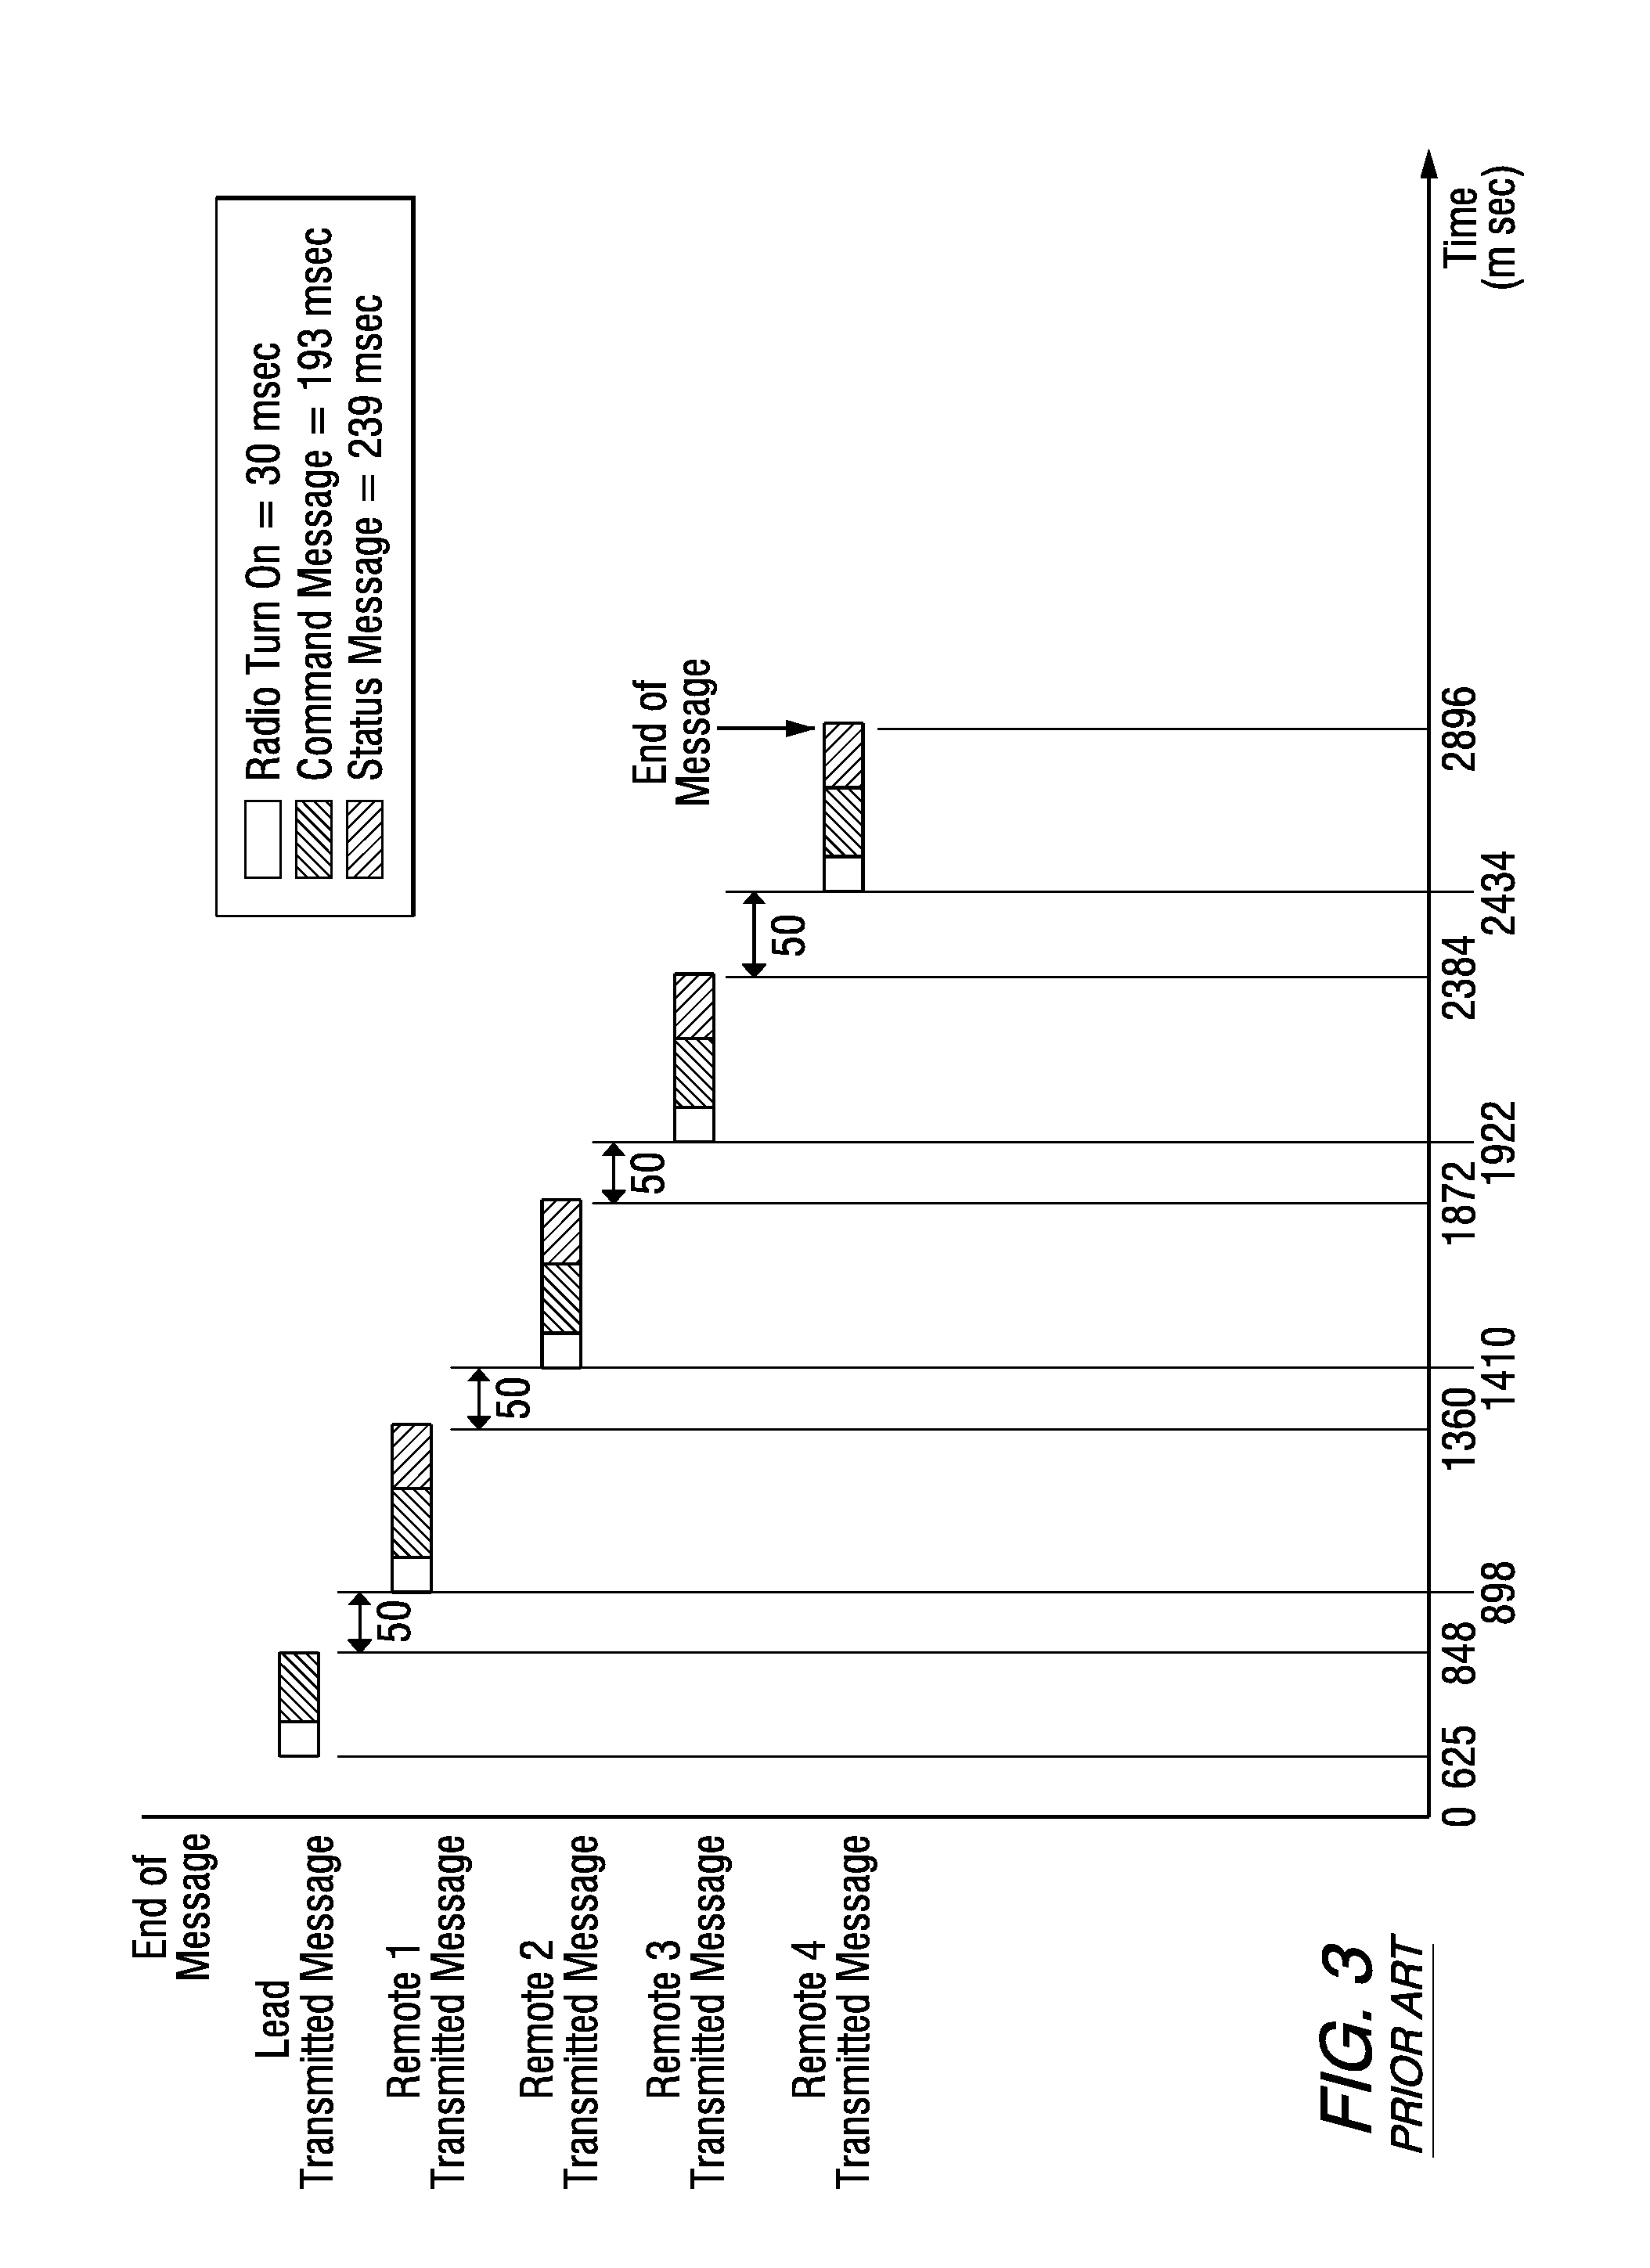 Method and apparatus related to on-board message repeating for vehicle consist communications system